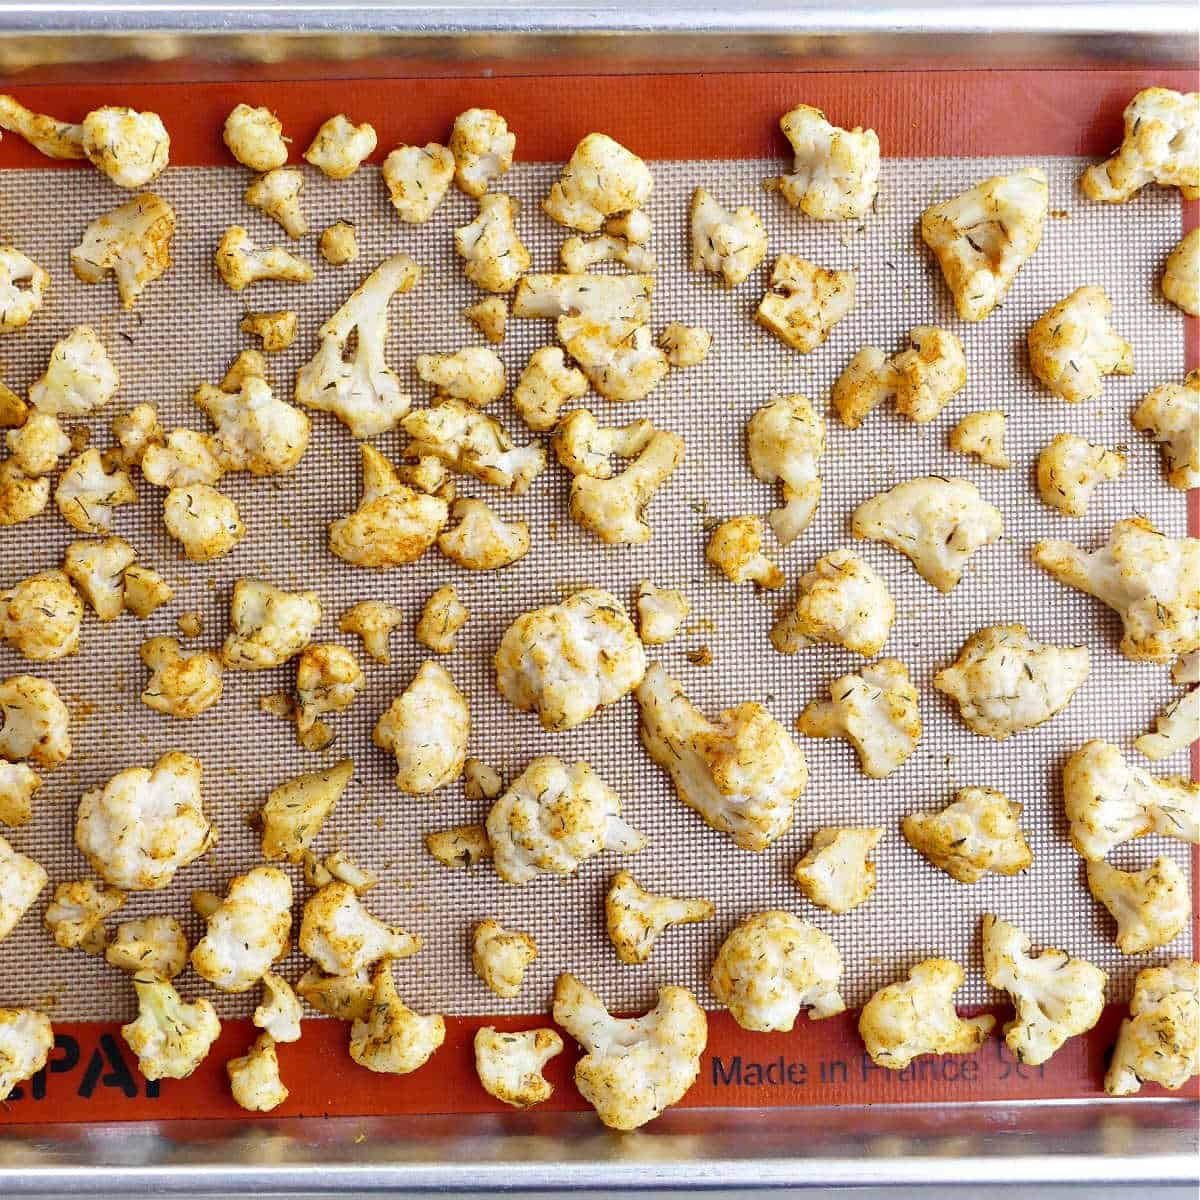 frozen cauliflower spread out on a lined baking sheet before being roasted in the oven